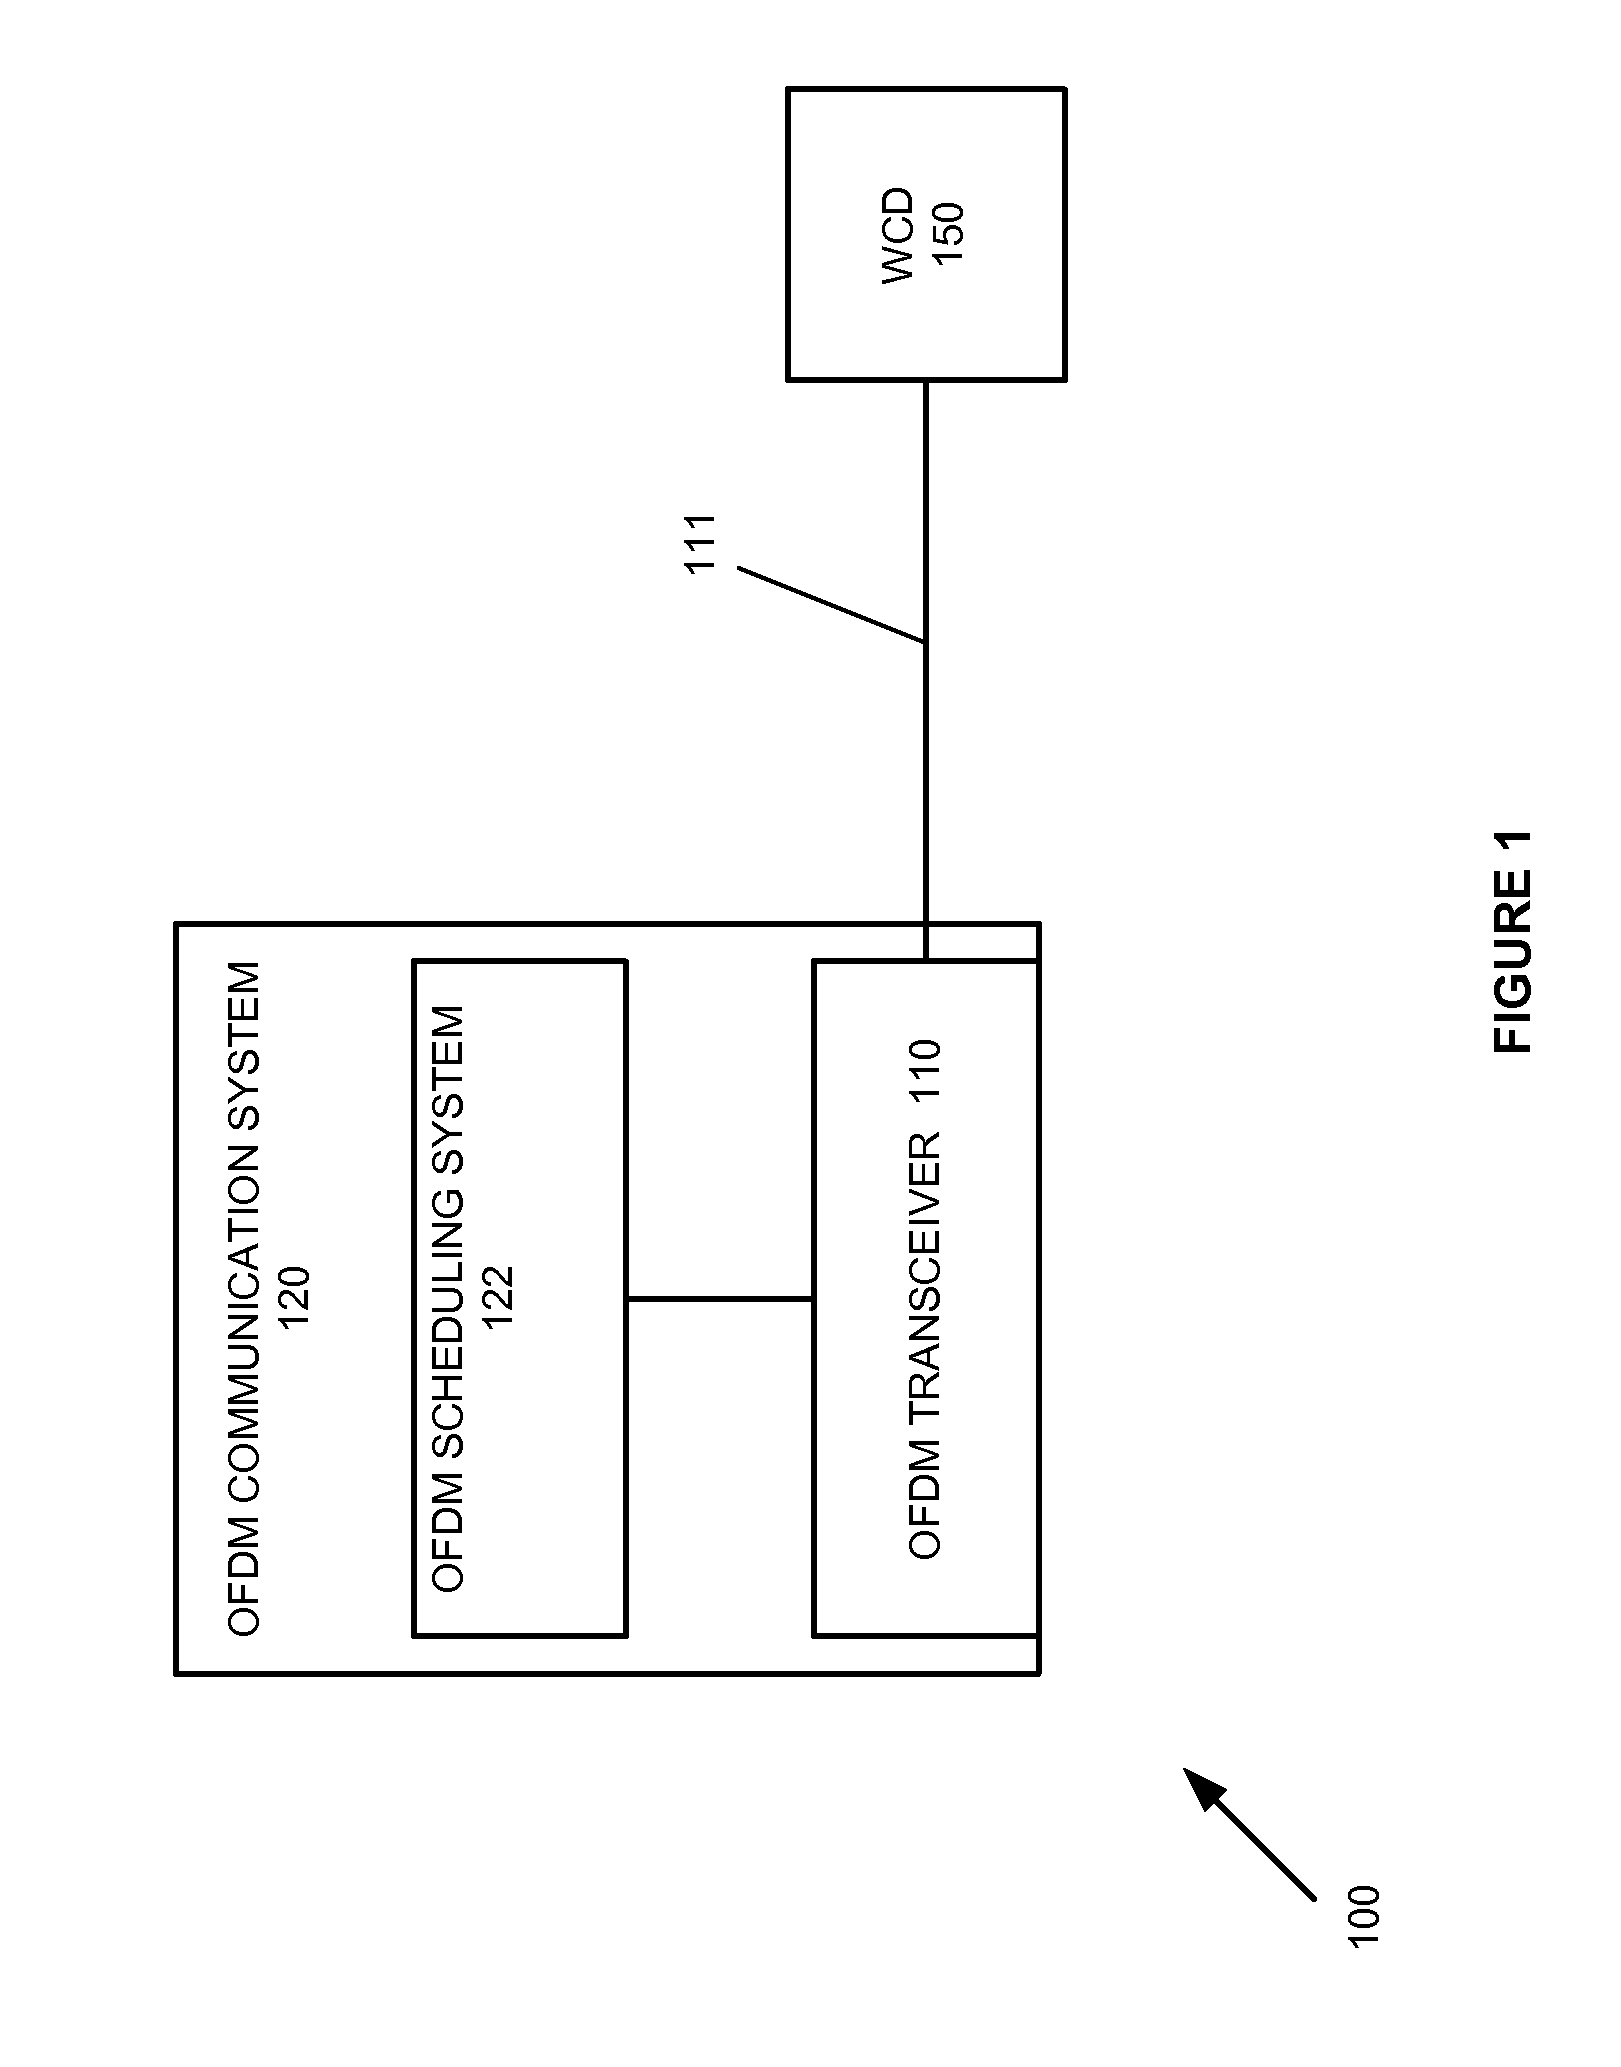 Orthogonal frequency division multiplexing (OFDM) communication system and method to schedule transfers of first and second user communications